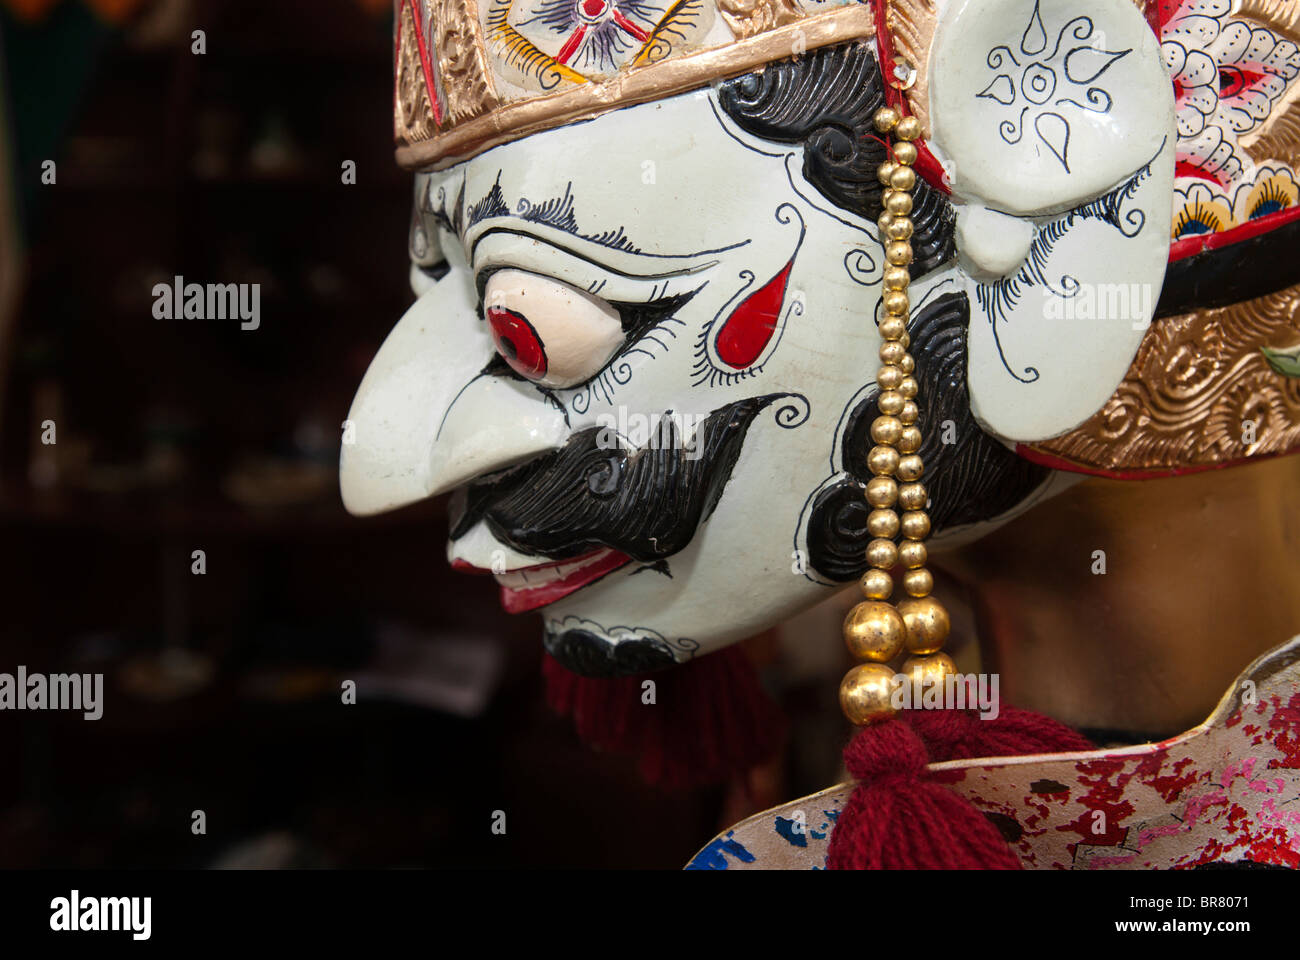 The head of a wayang golek. Wayang golek is traditional wooden puppet origined from West Java, Indonesia. Stock Photo